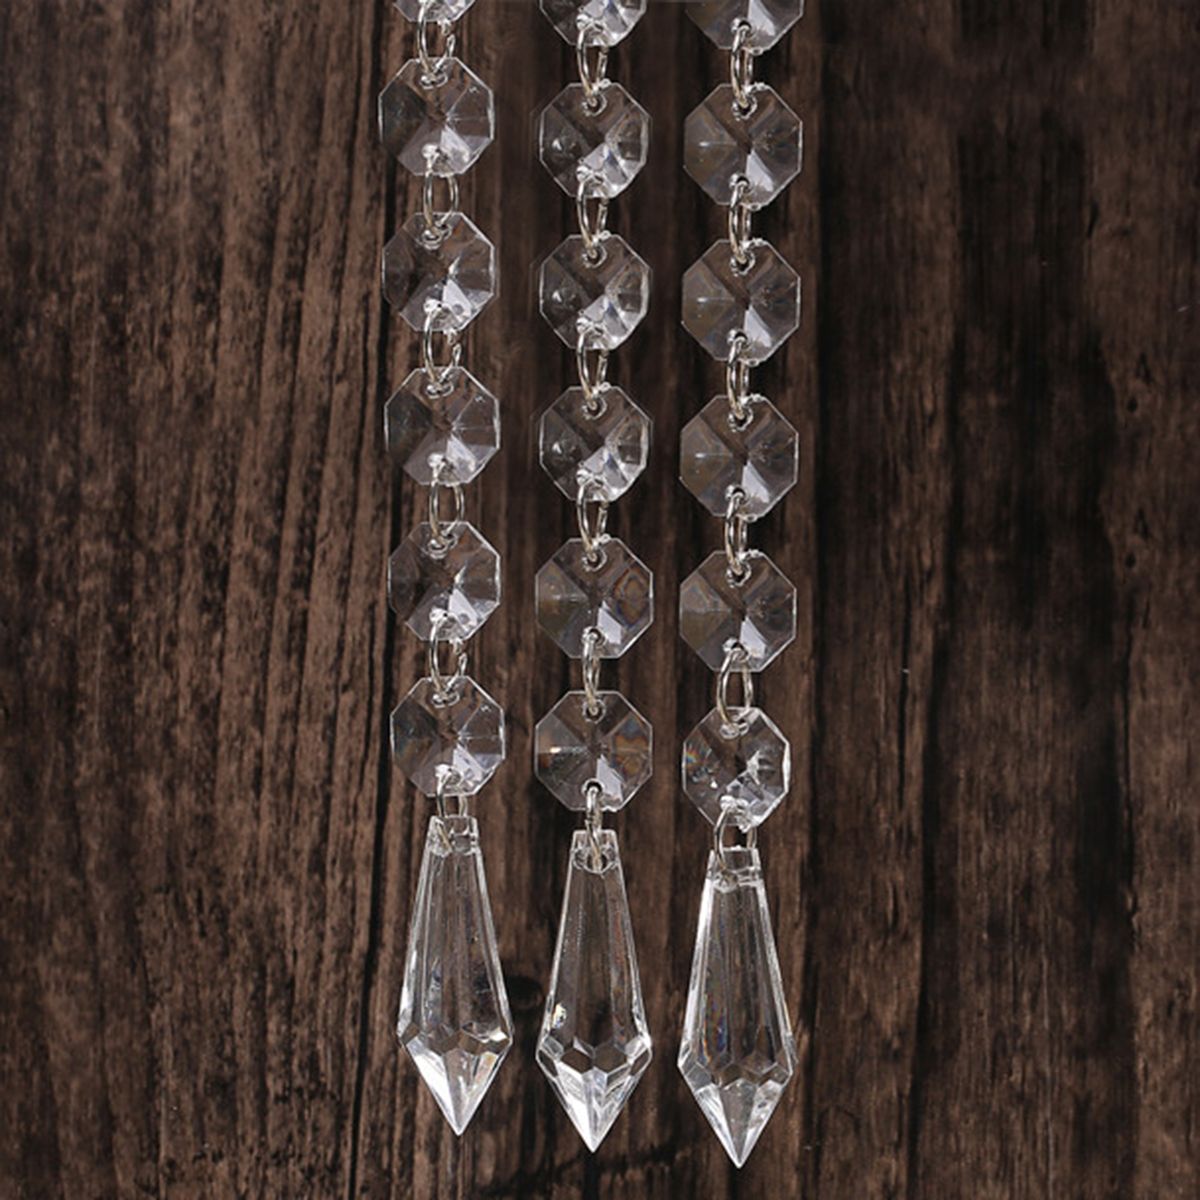 30PCS-Acrylic-Crystal-Beads-Chain-Chandelier-Pendant-Light-Garland-Hanging-Wedding-Home-Party-1374553